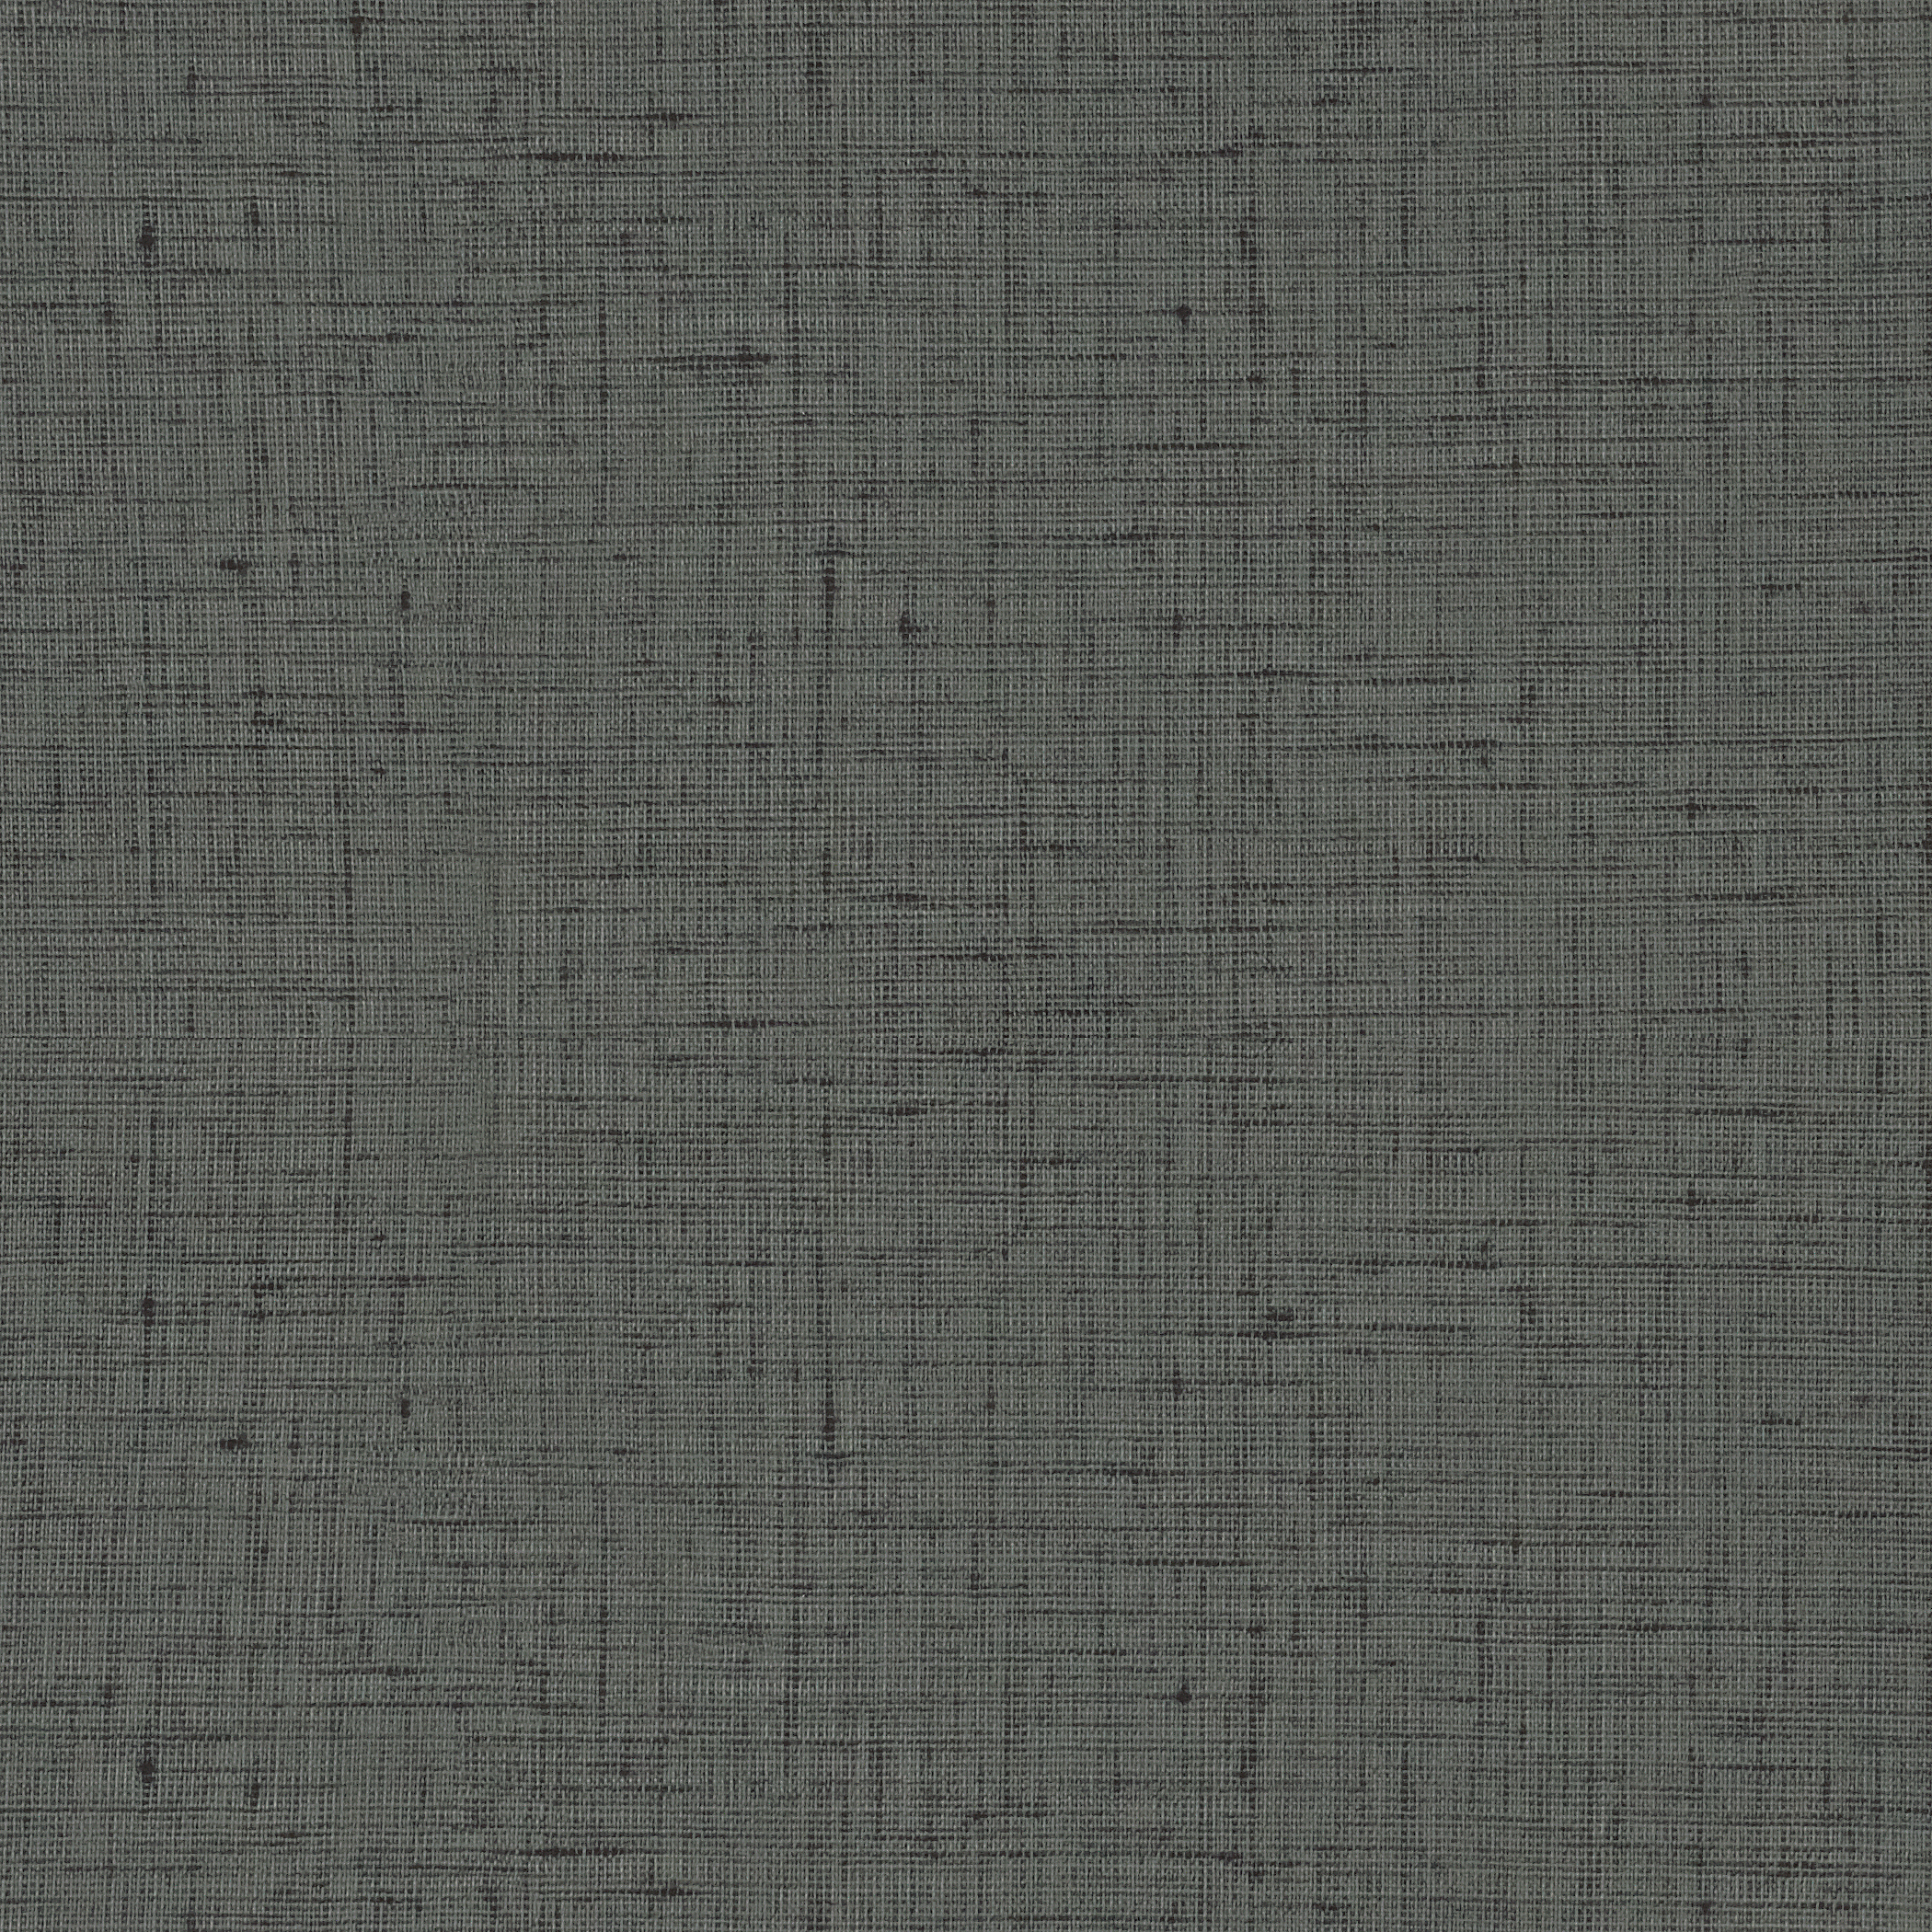 Charcoal Lacquered Linen